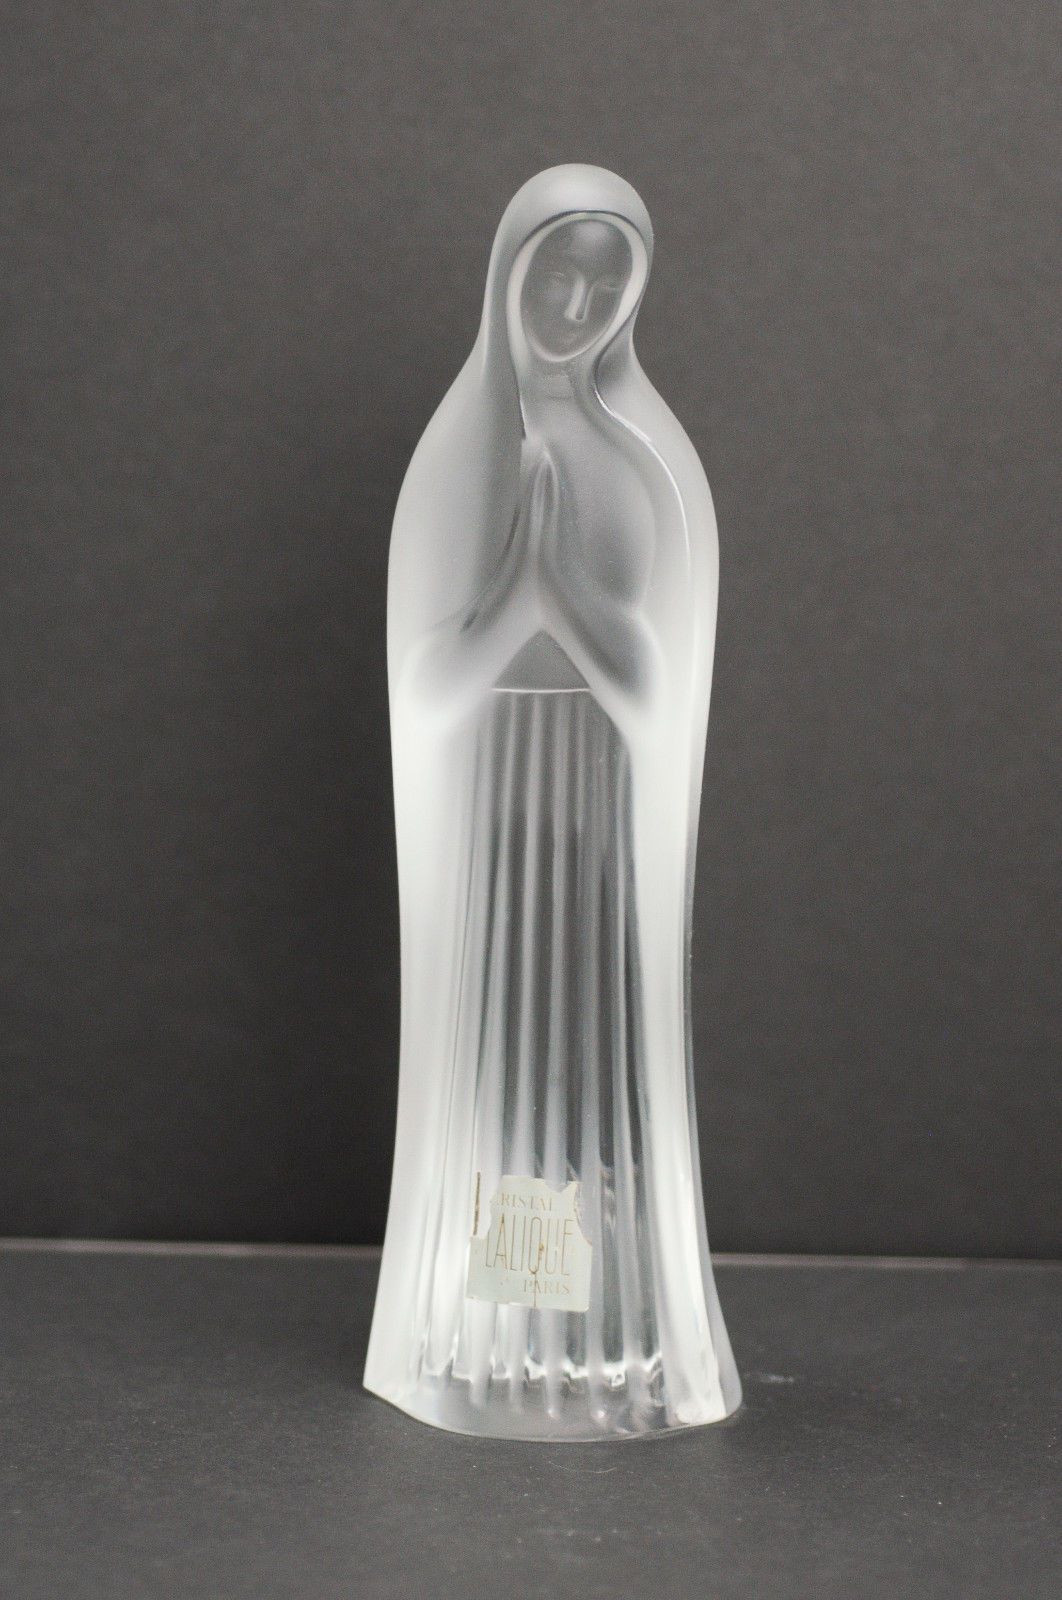 16 Popular Lalique Vases On Ebay 2024 free download lalique vases on ebay of pin by cailyn harley on my home decor pinterest antiques throughout pin by cailyn harley on my home decor pinterest antiques crystals and vintage